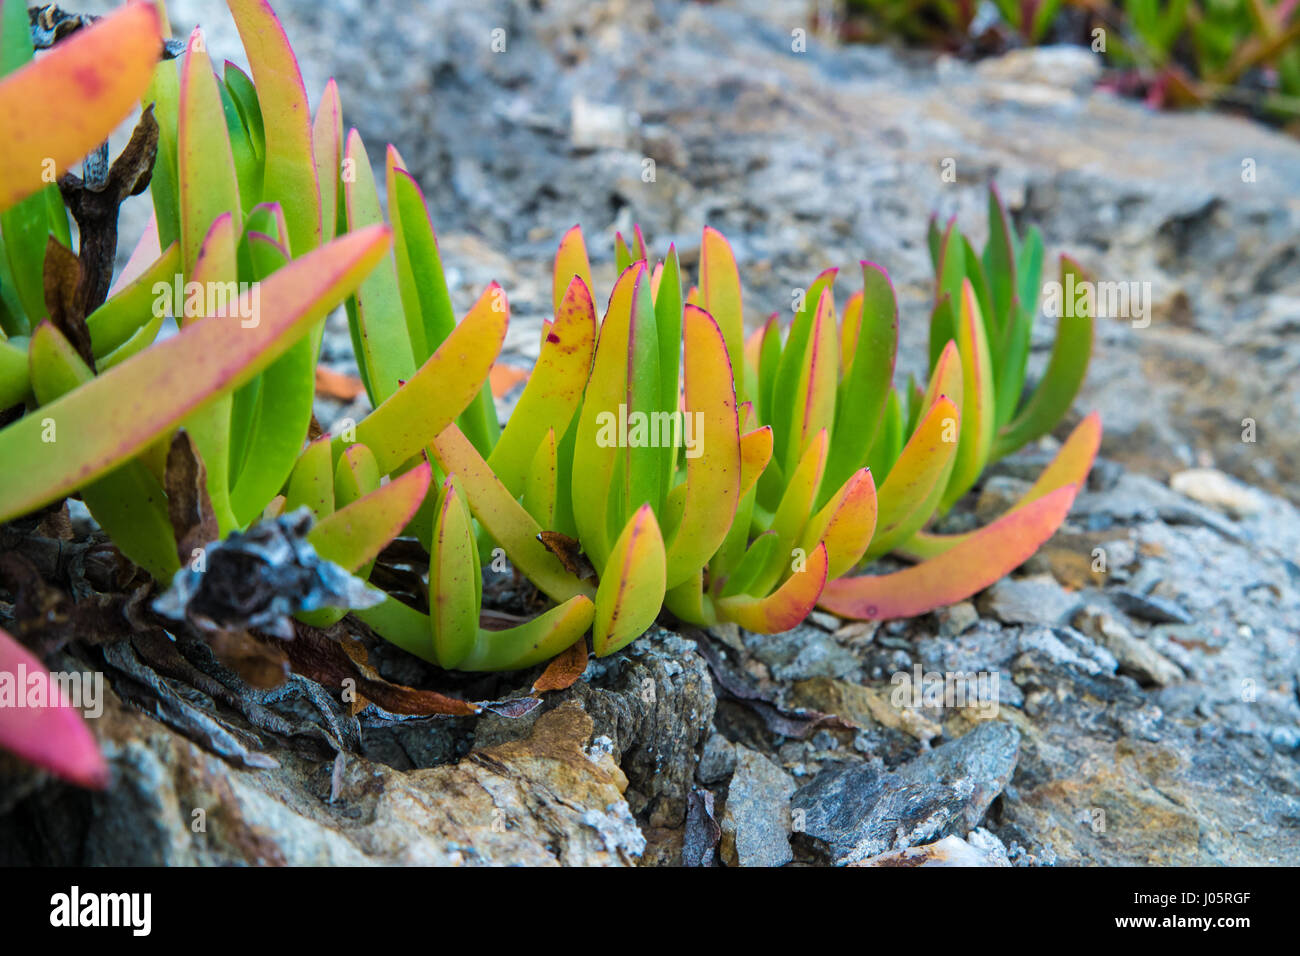 Closeup of Sea Fig Ice plant leaves growing on rocks Stock Photo